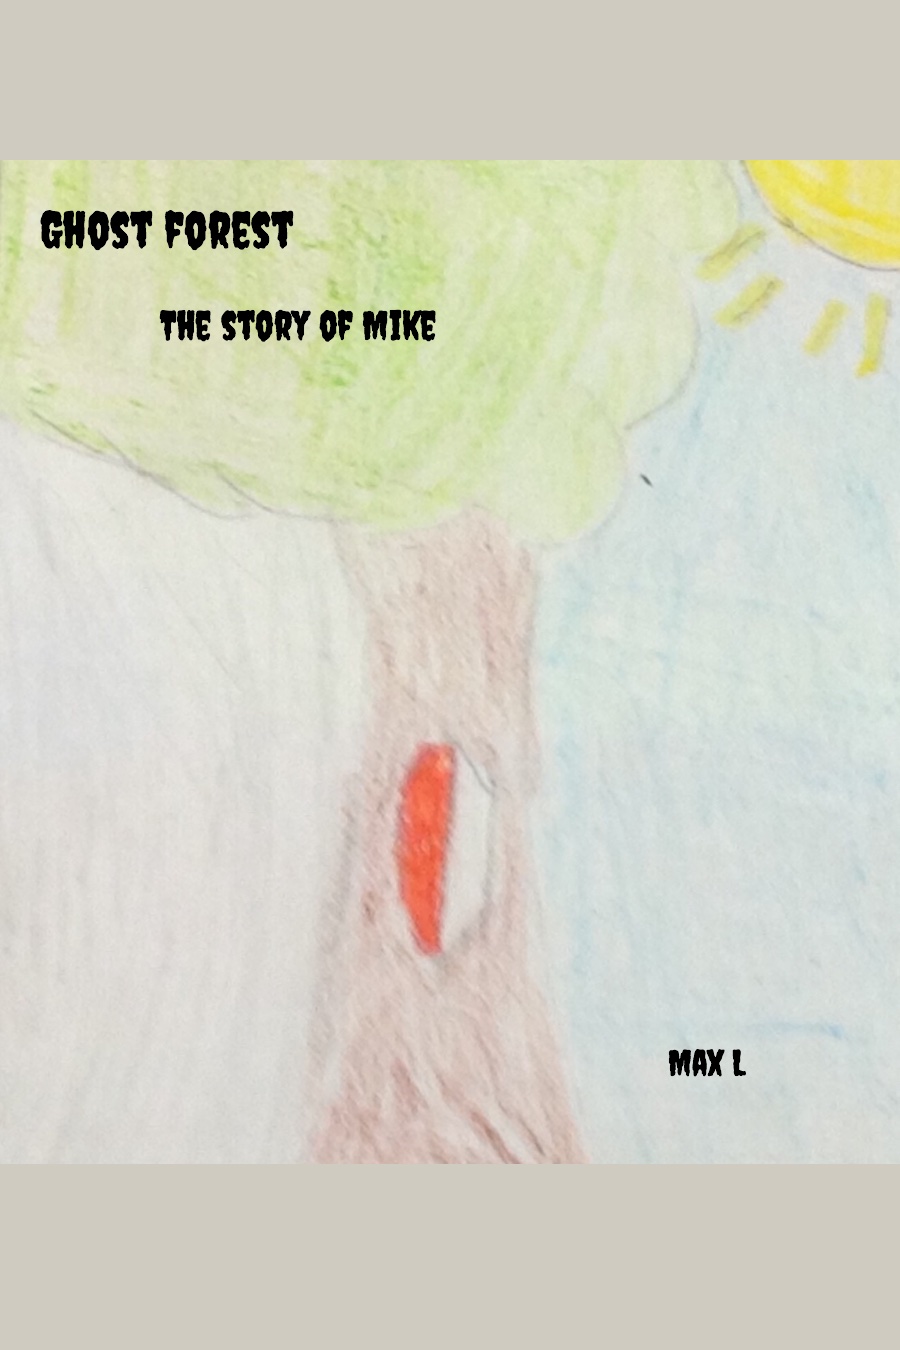 Ghost Forest: The Story of Mike by Max L